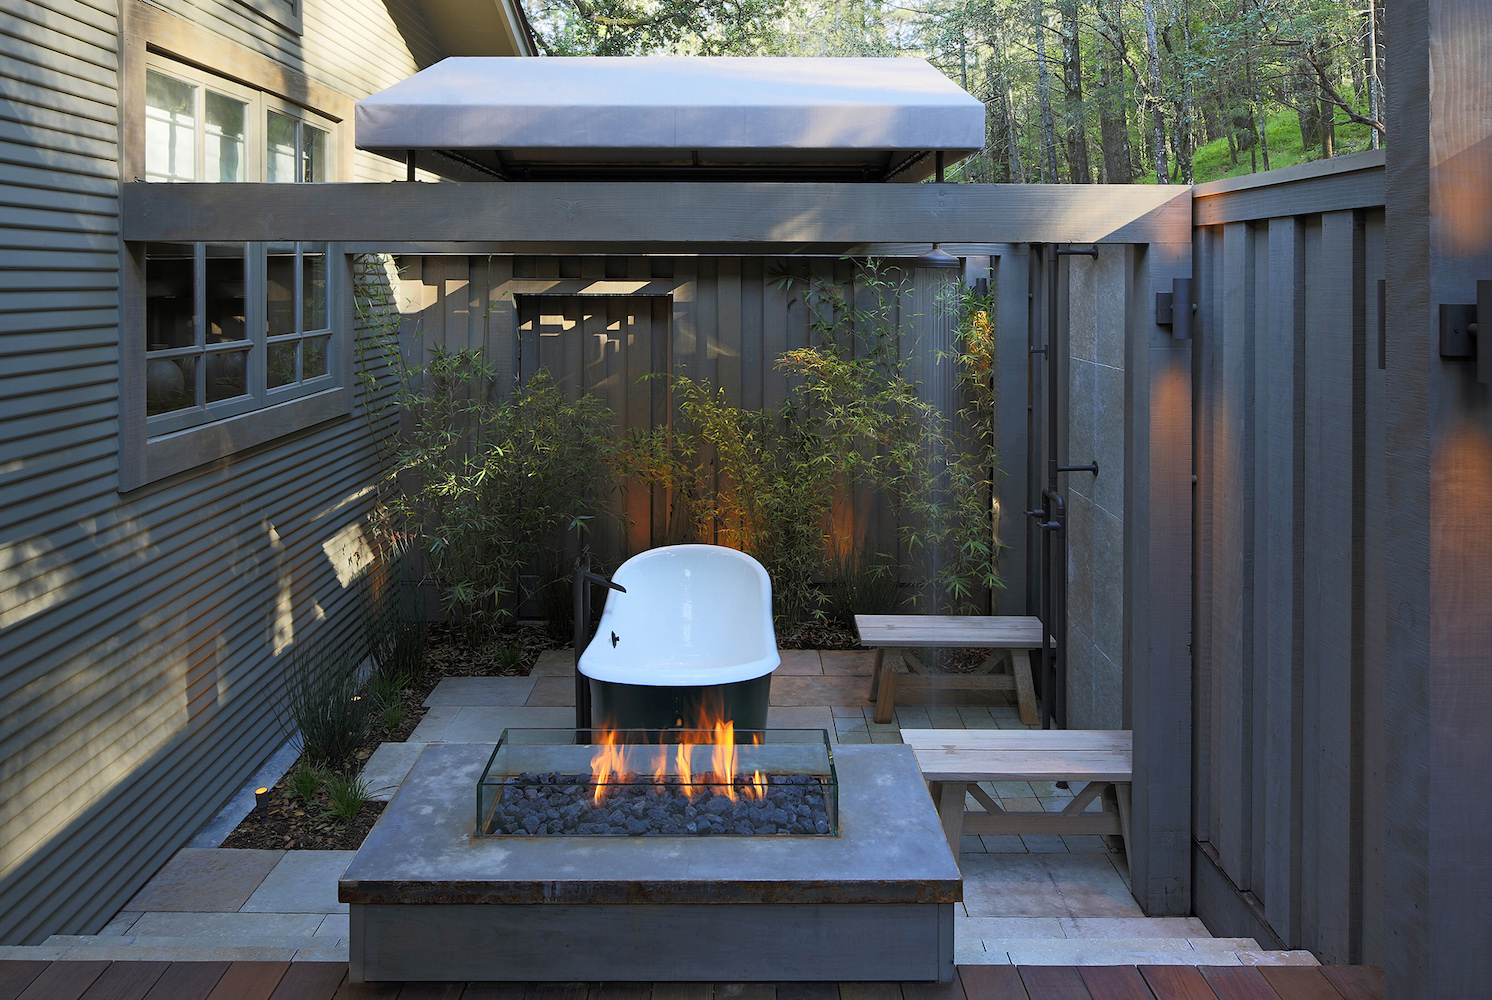 Hill House Outdoor tub, shower and Fire pit